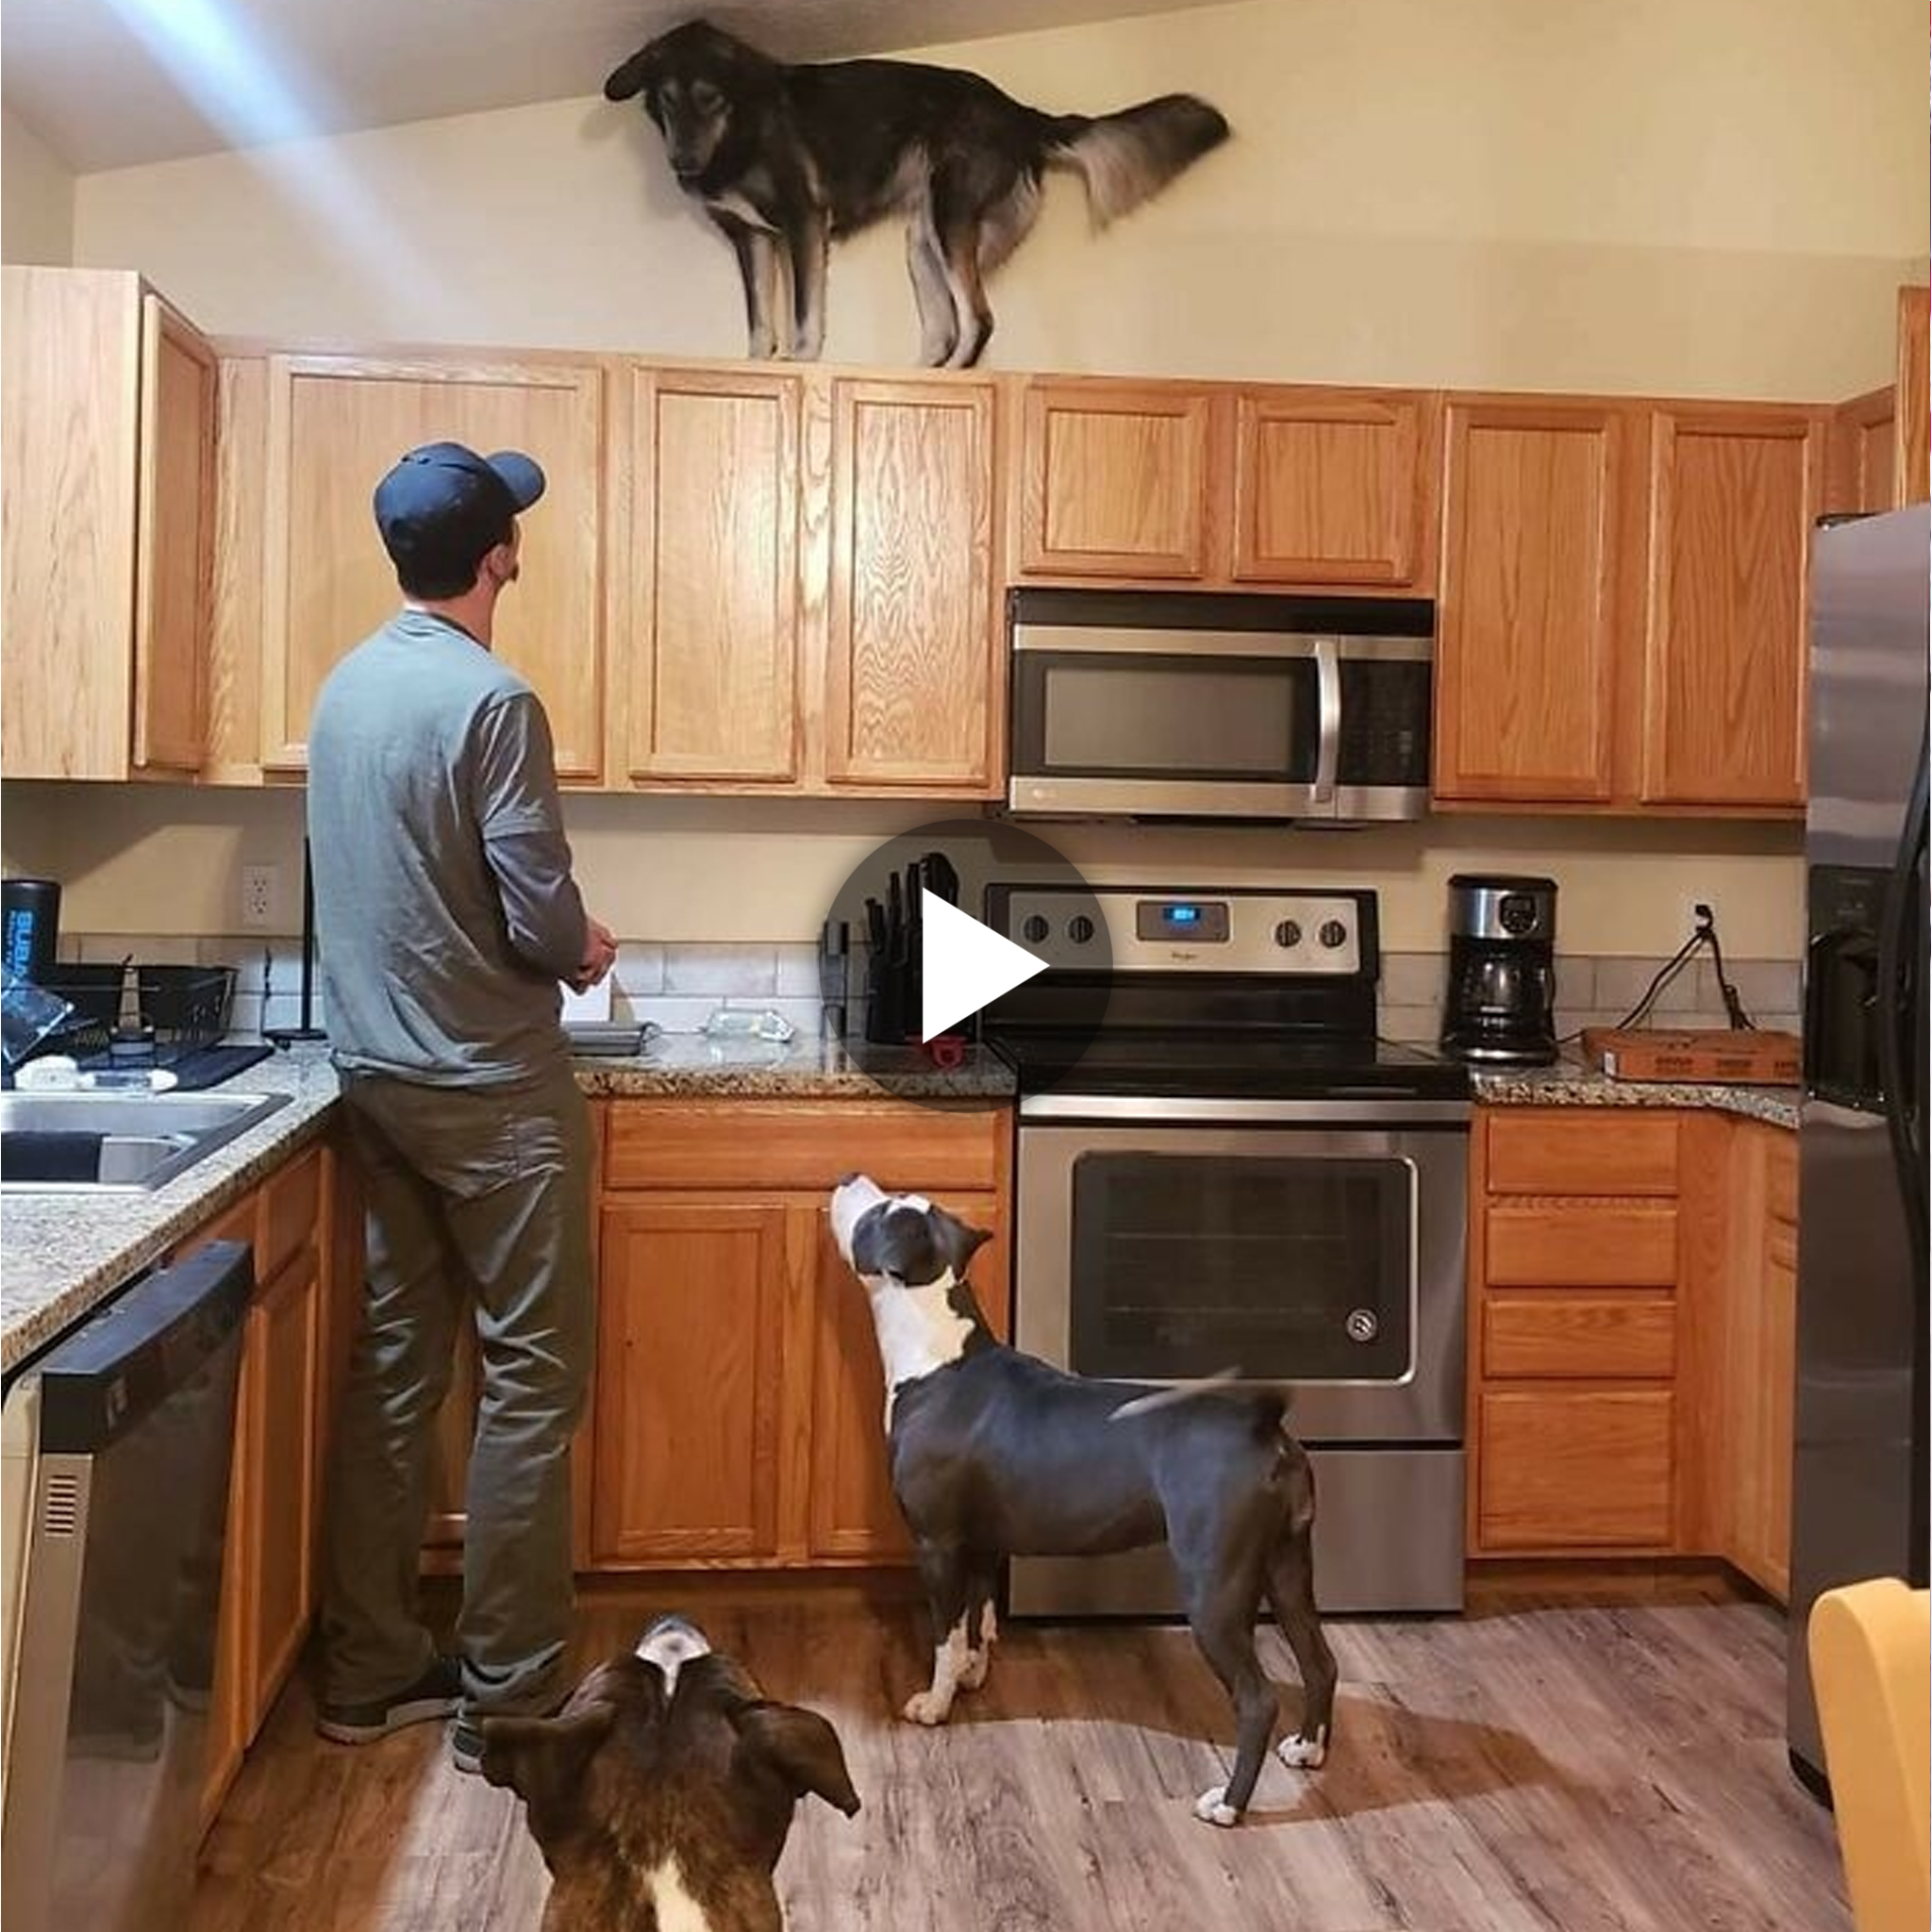 In addition to demonstrating an amazing acrobatic feat, the husky’s frightened leap onto the tall cabinet went viral online, captivating communities with its expressive reaction that sparked a delightful blend of amusement and empathy across the virtual landscape. ‎